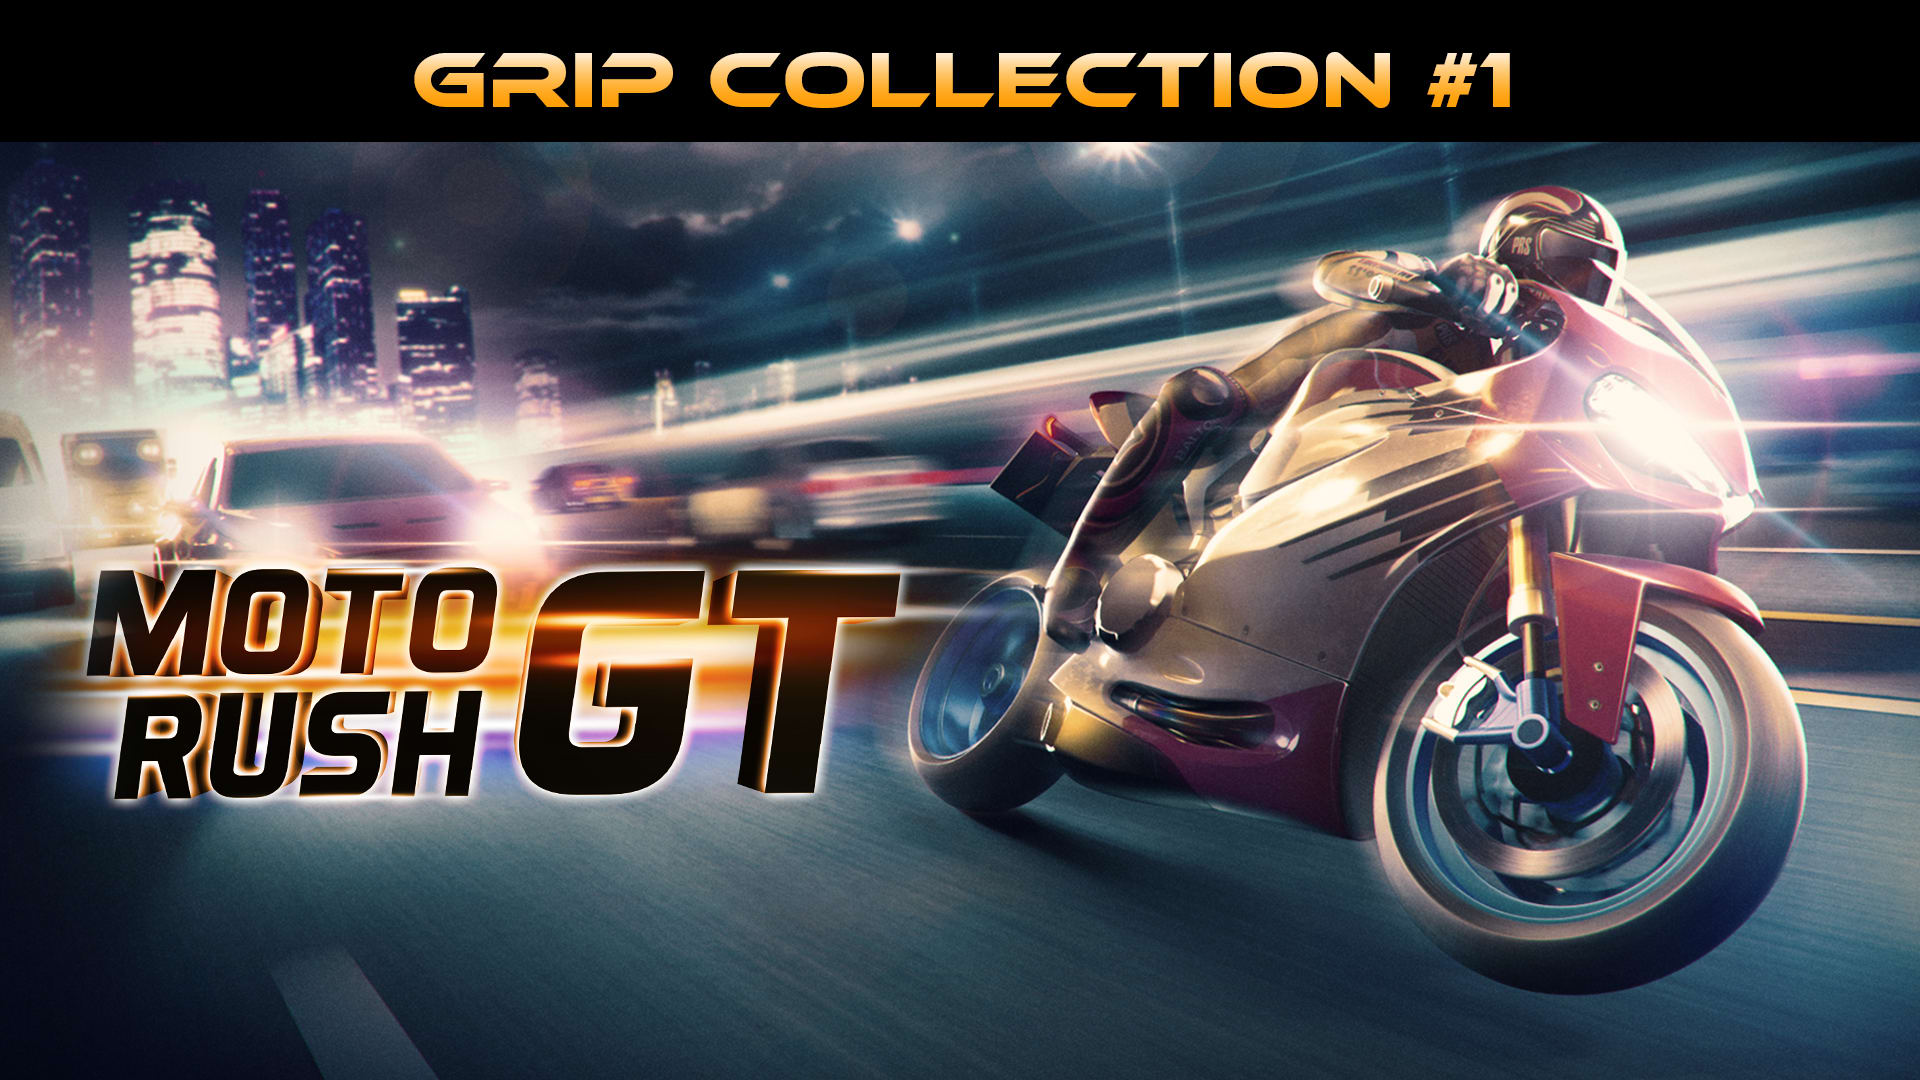 Moto Rush GT Grip Collection #1